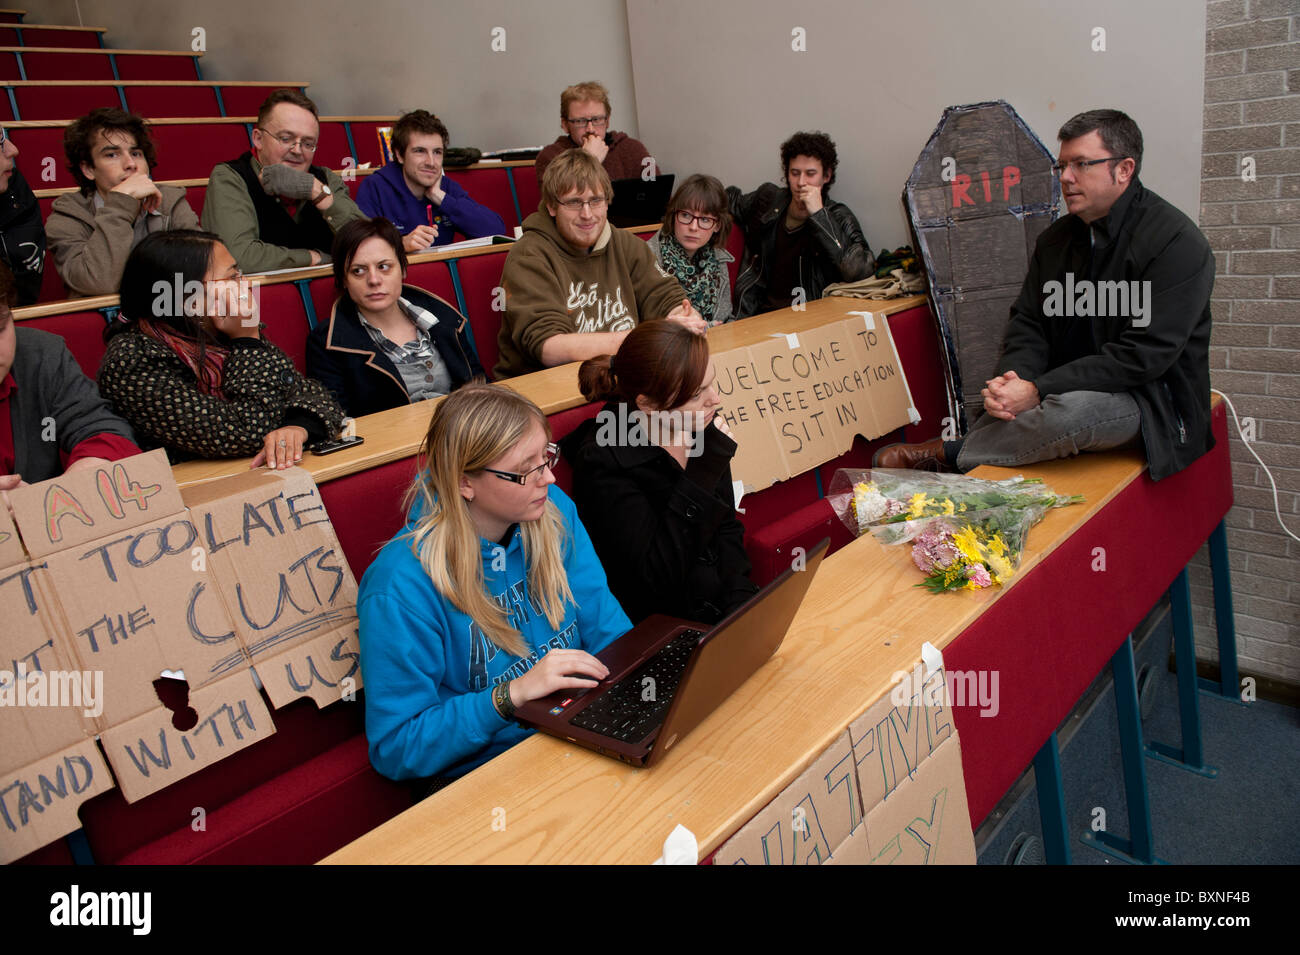 Lecturer in International Politics PETER JACKSON discussing the education cuts with students at Aberystwyth University Wales UK Stock Photo